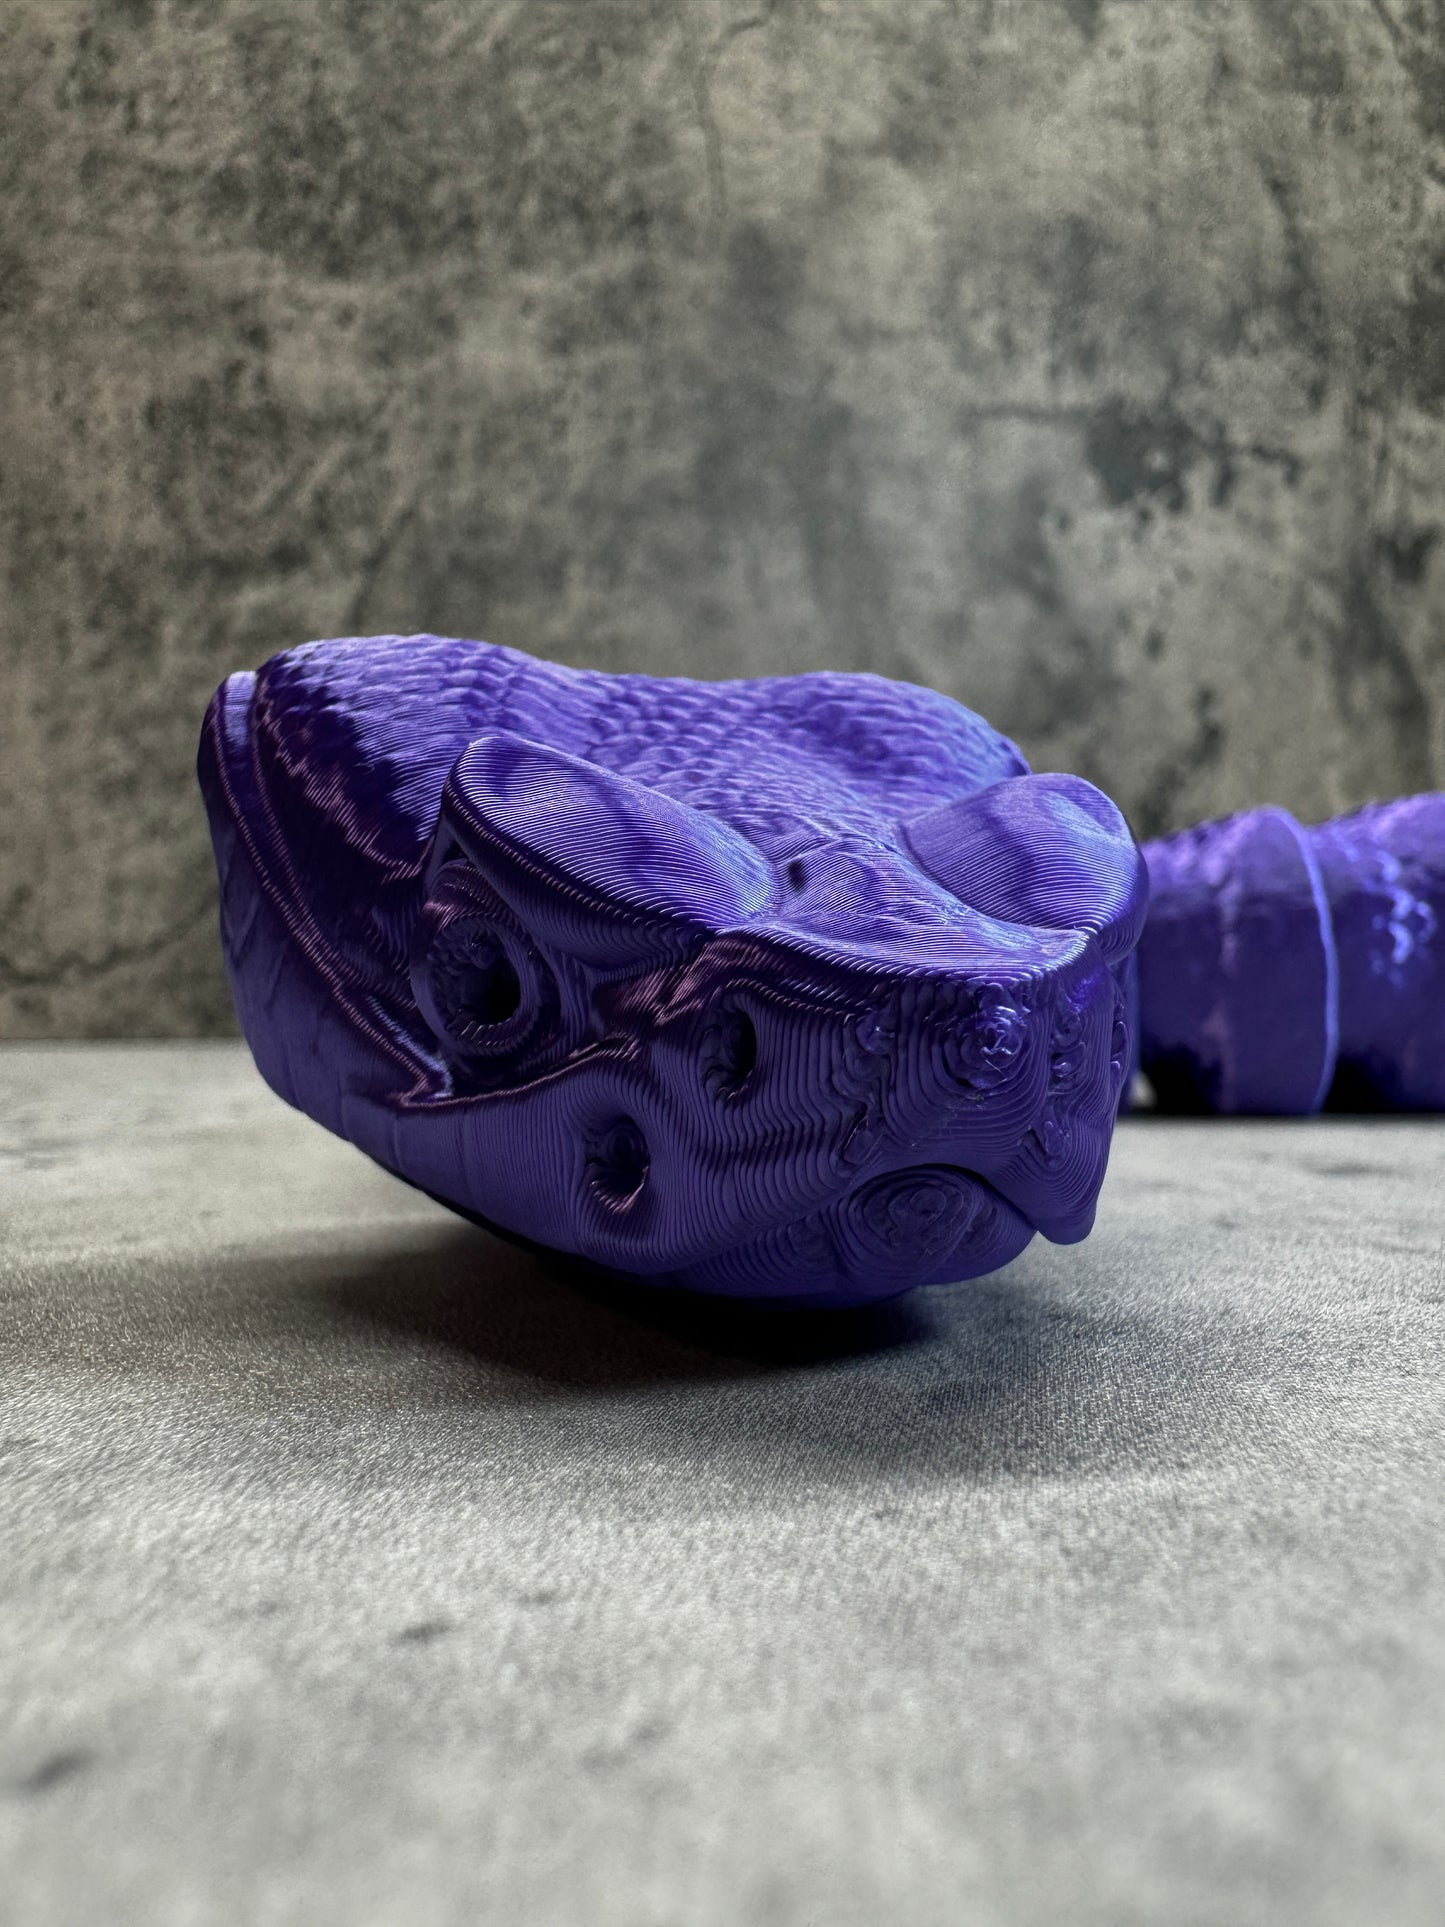 
                  
                    a purple shoe hanging on the side of a wall
                  
                